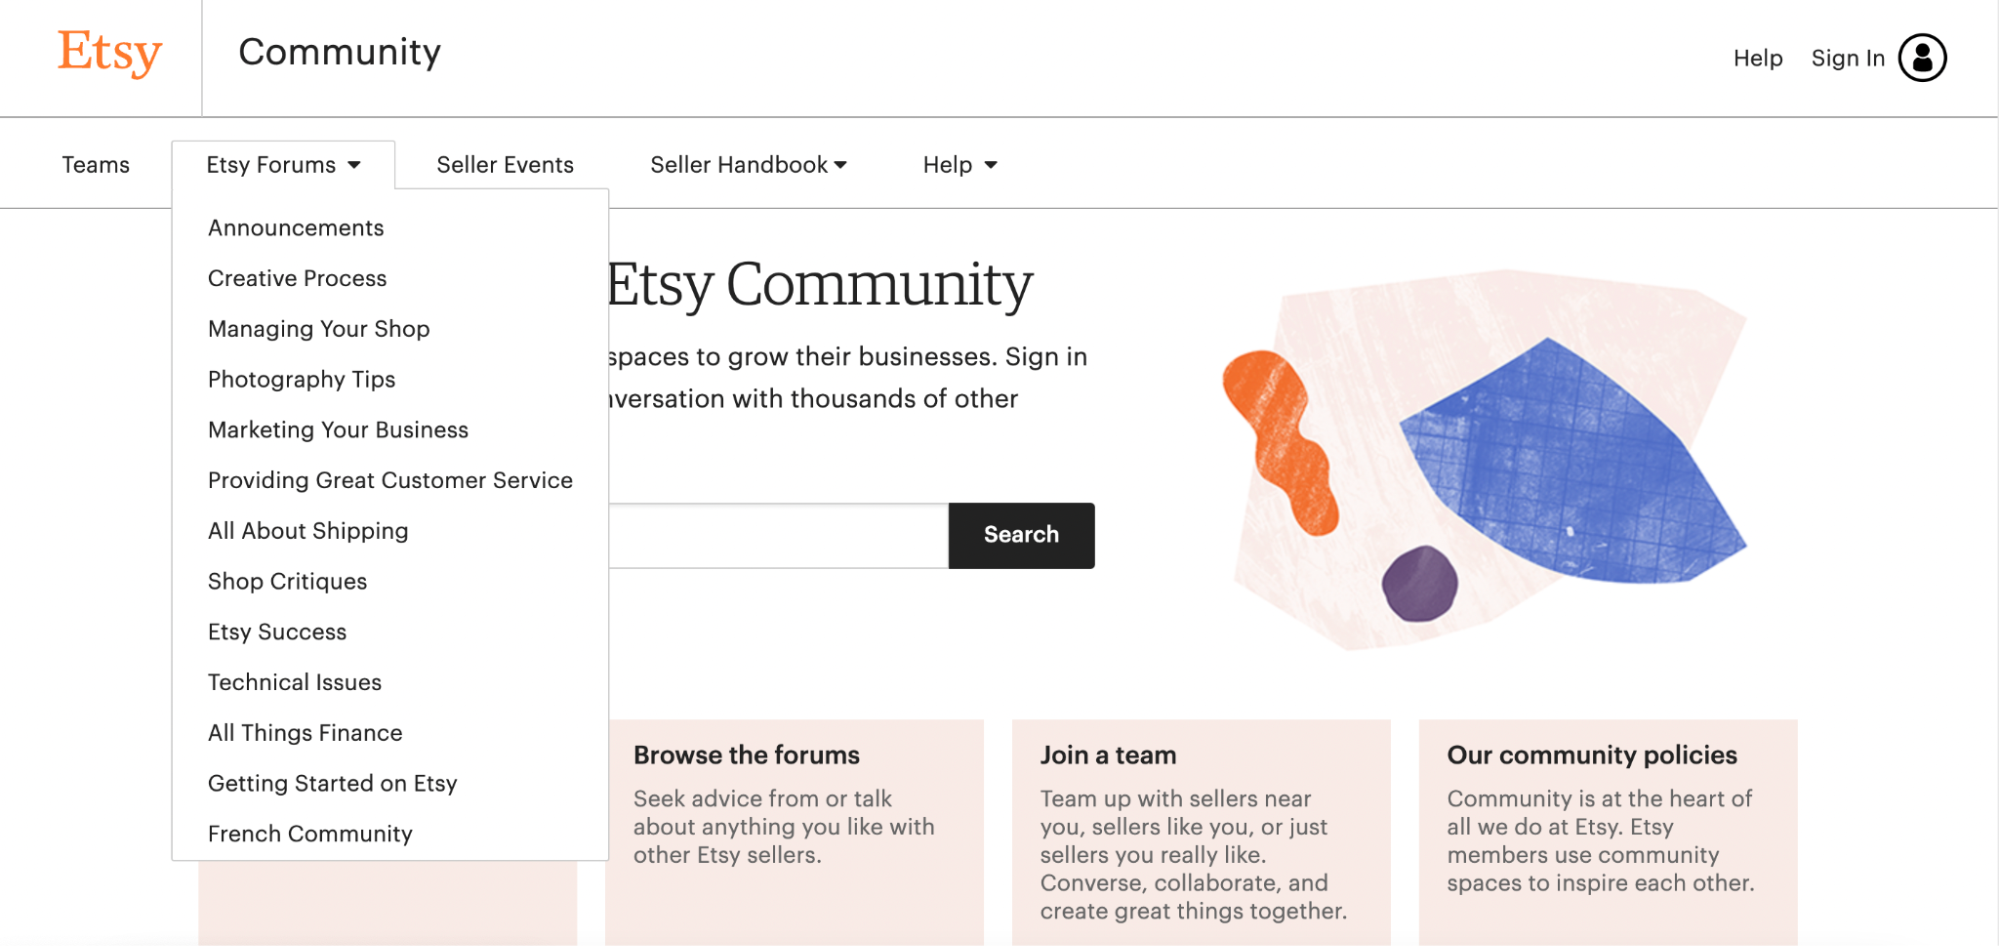 Etsy, a peer-to-peer marketplace for handmade goods, has one of the largest communities